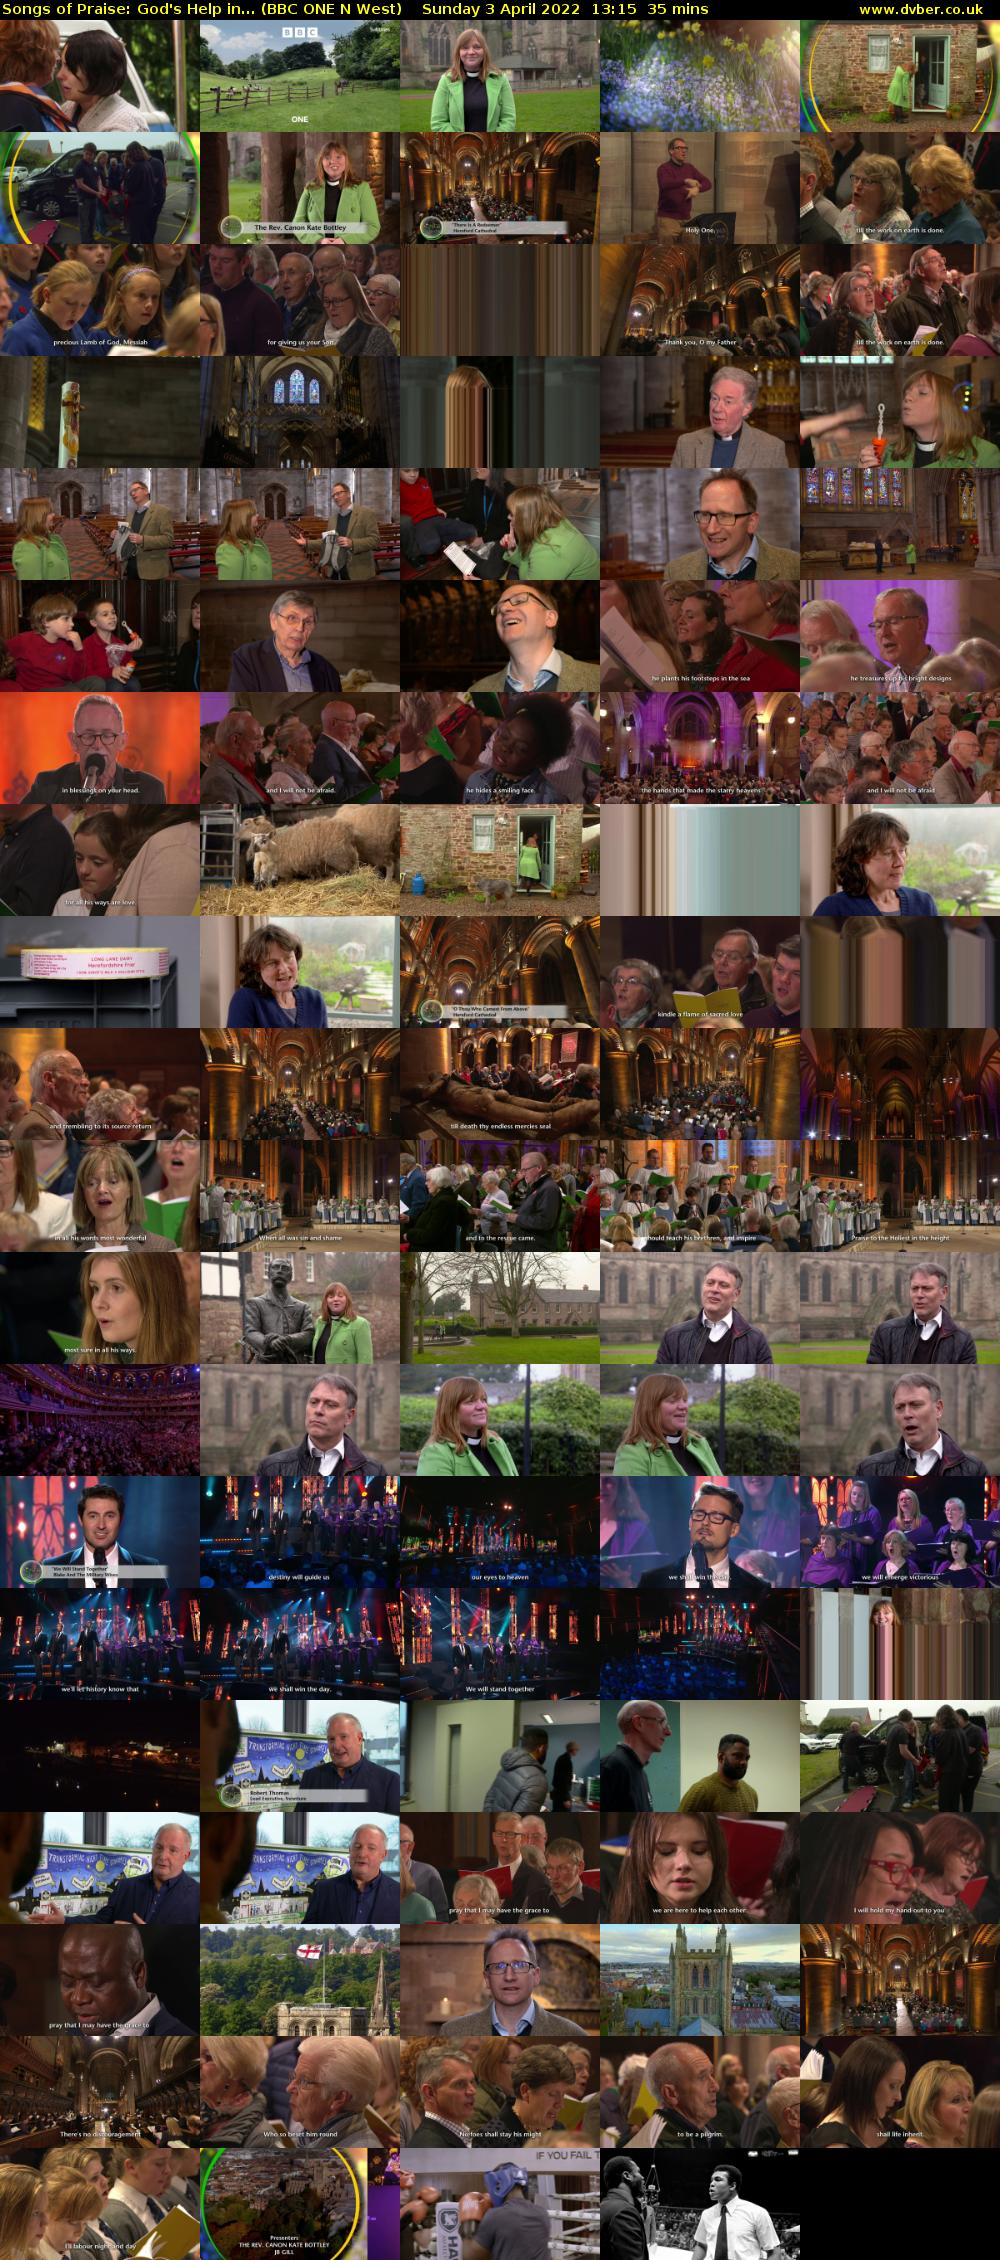 Songs of Praise: God's Help in... (BBC ONE N West) Sunday 3 April 2022 13:15 - 13:50